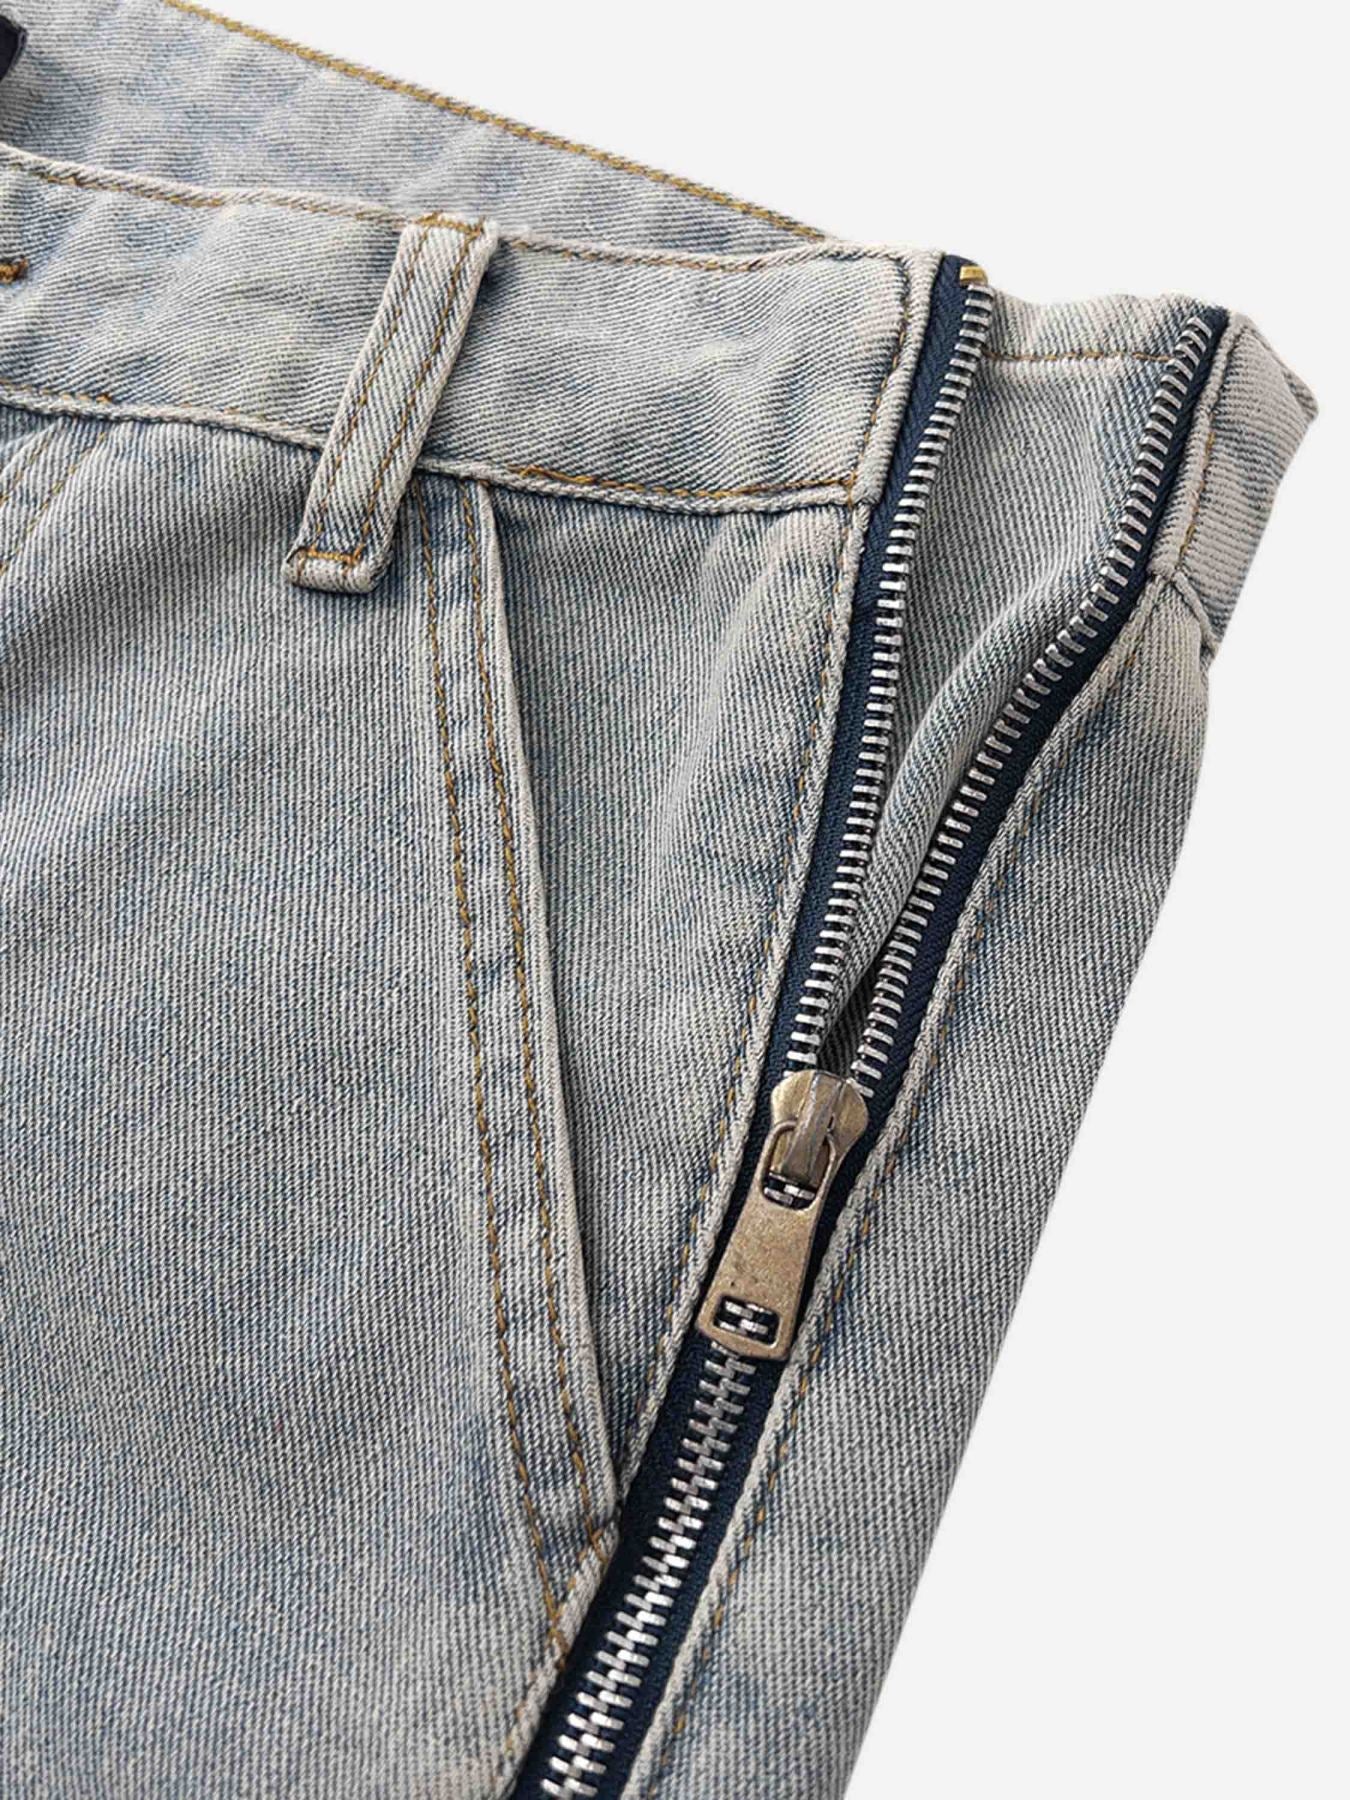 The Supermade American Washed And Zippered Design Jeans